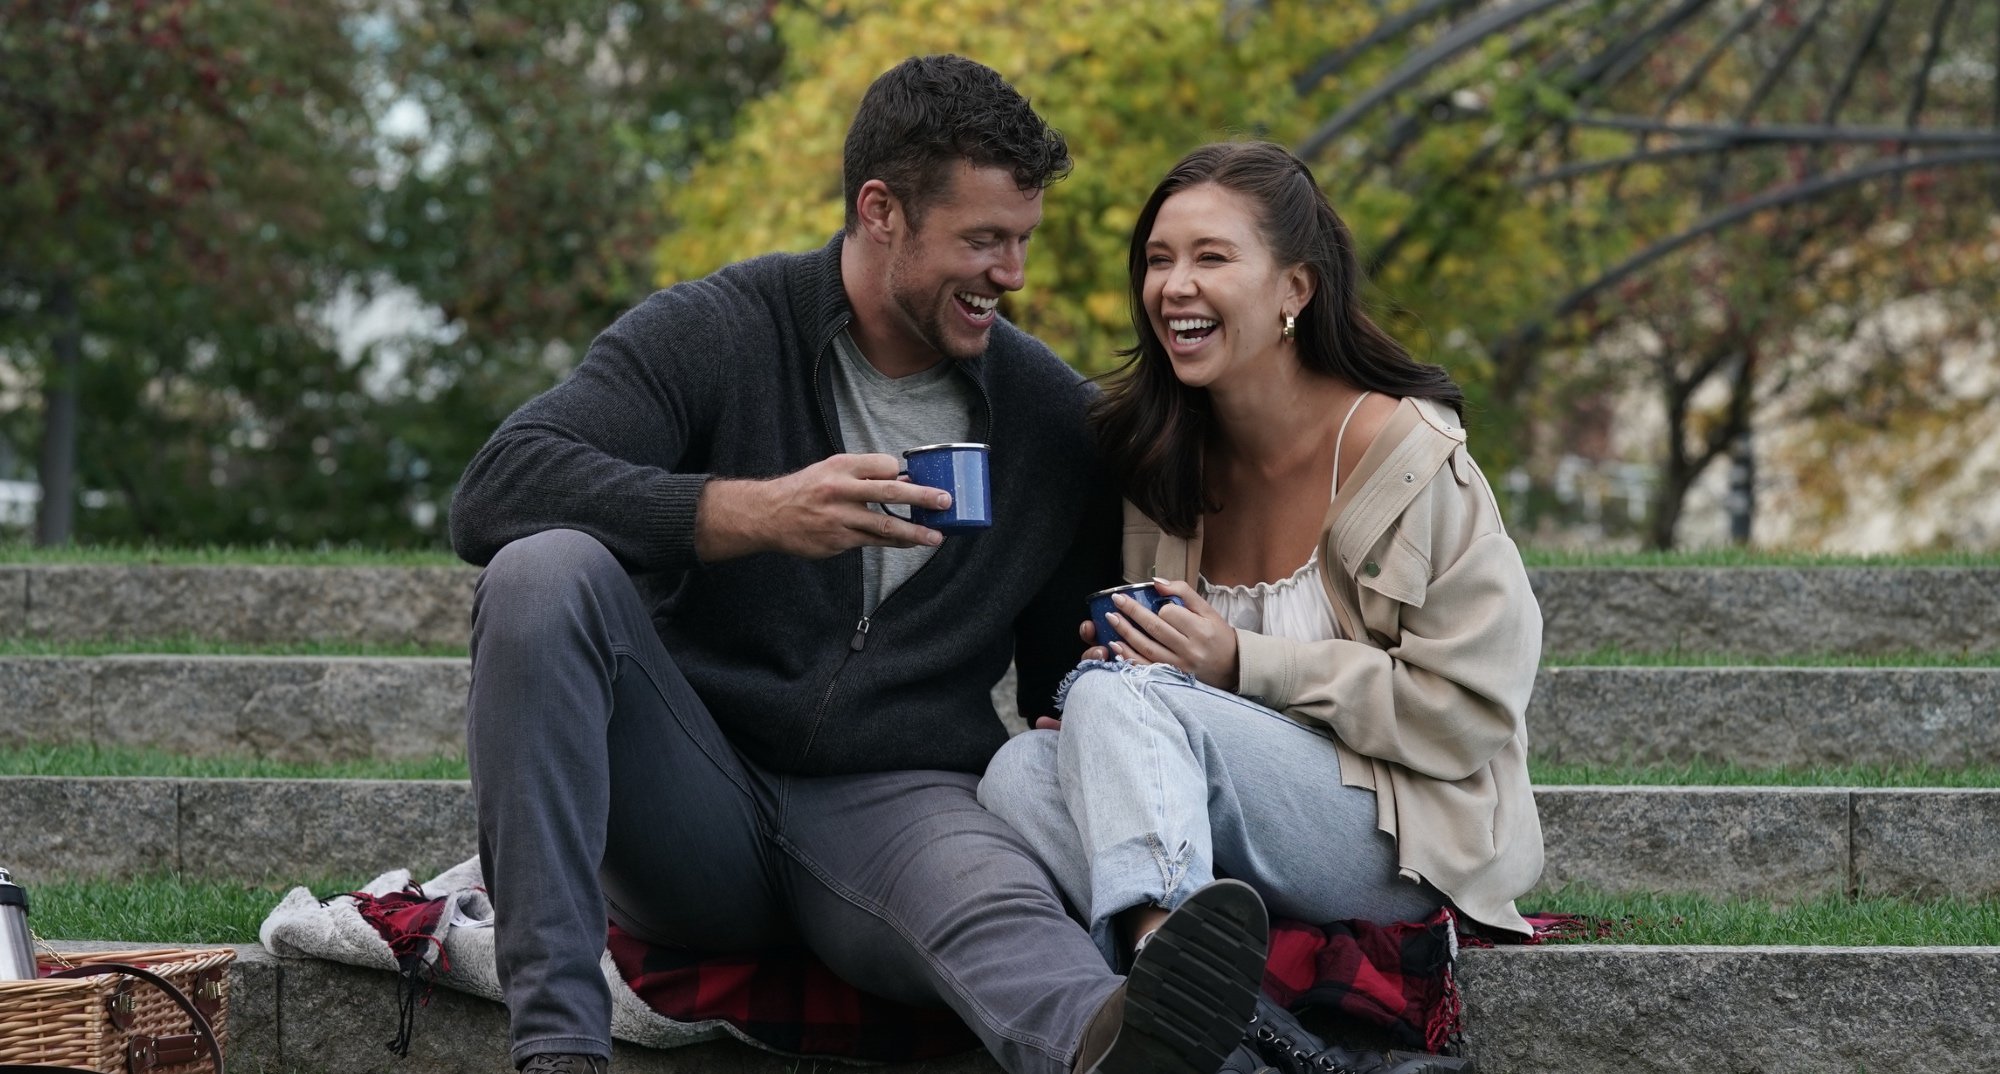 Clayton Echard and Gabby Windey on 'The Bachelor' sitting in park and laughing.